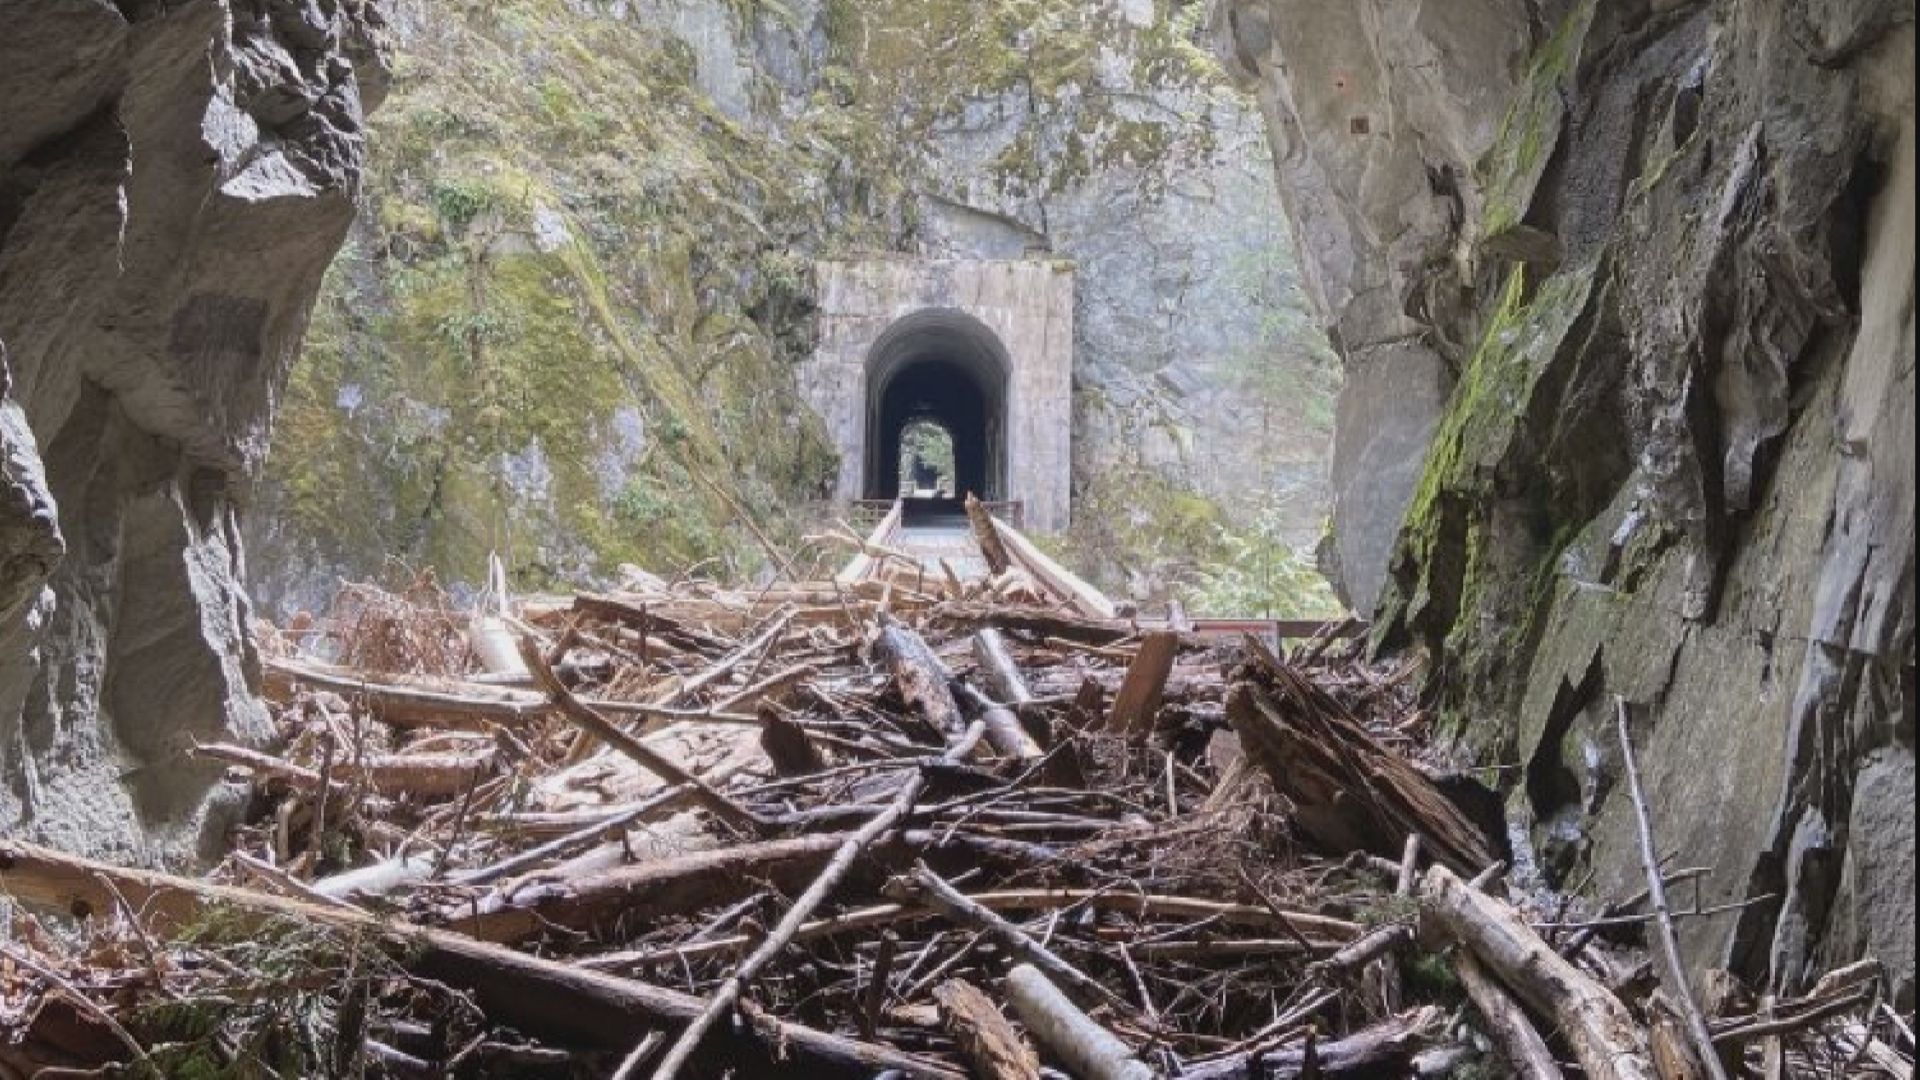 Coquihalla Canyon Park, Othello Tunnels set to reopen 2.5 years after flood